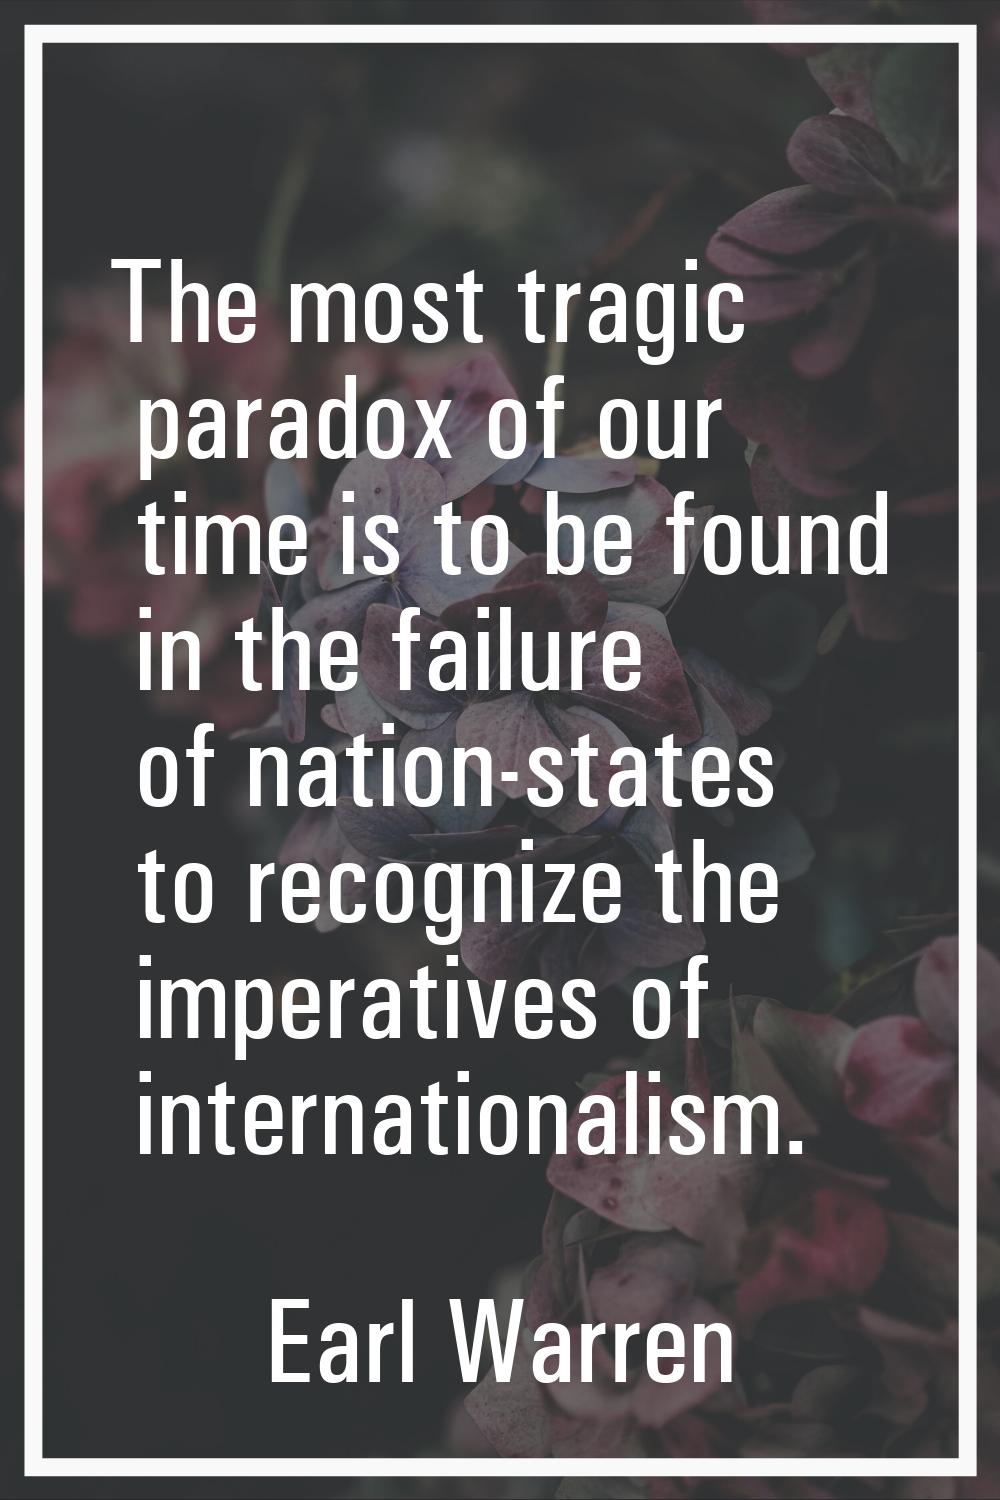 The most tragic paradox of our time is to be found in the failure of nation-states to recognize the